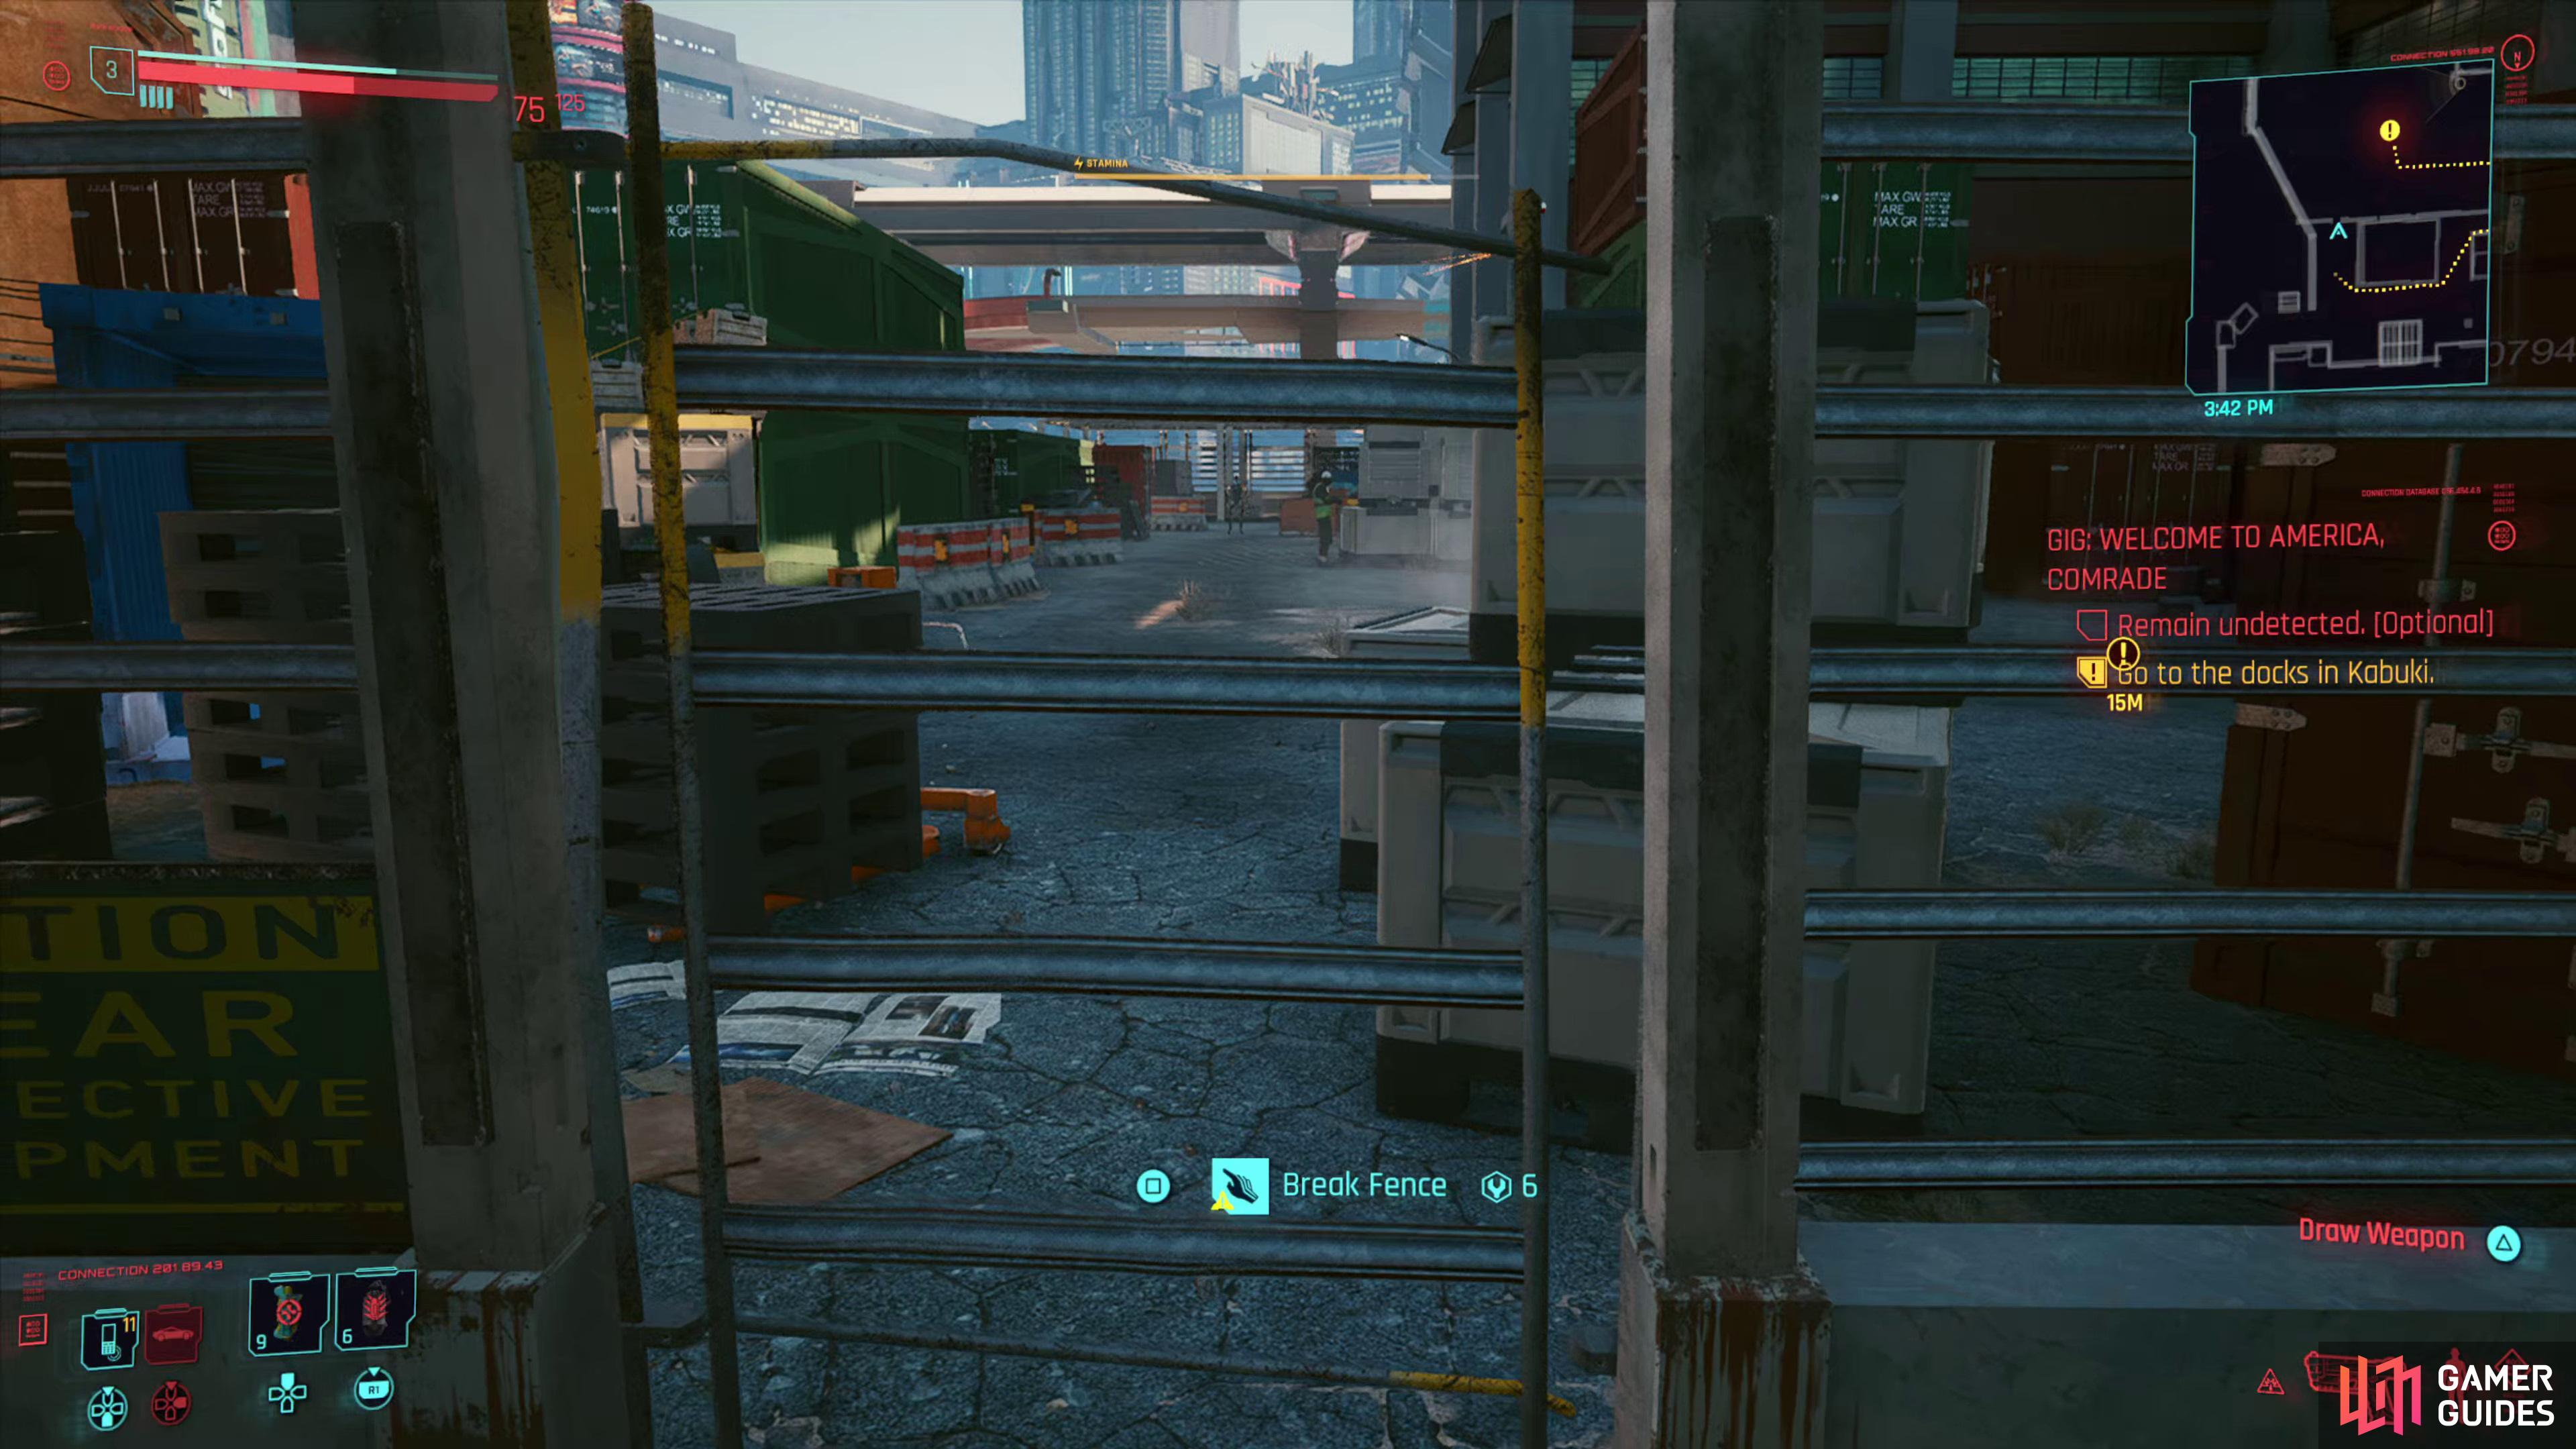 You can enter the dock via the fence on the left if your Tech is at Level 6 